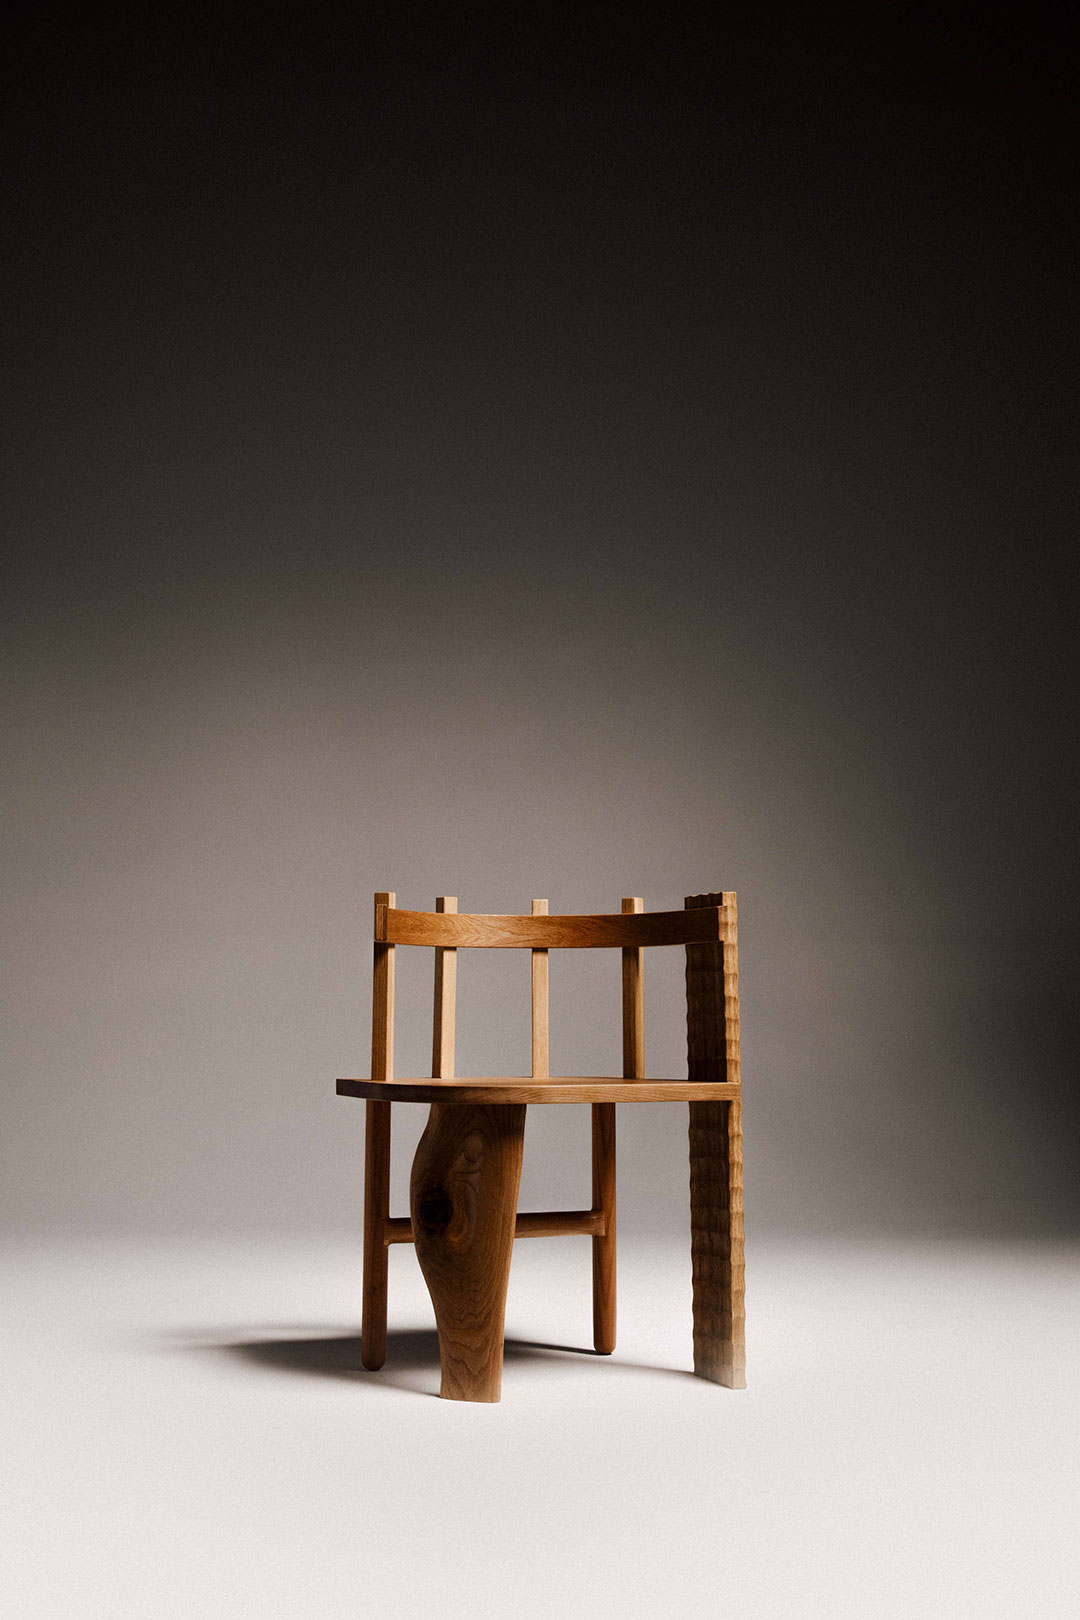 piece-quiet-a-series-of-decoupe-chairs-by-nathaniel-wojtalik